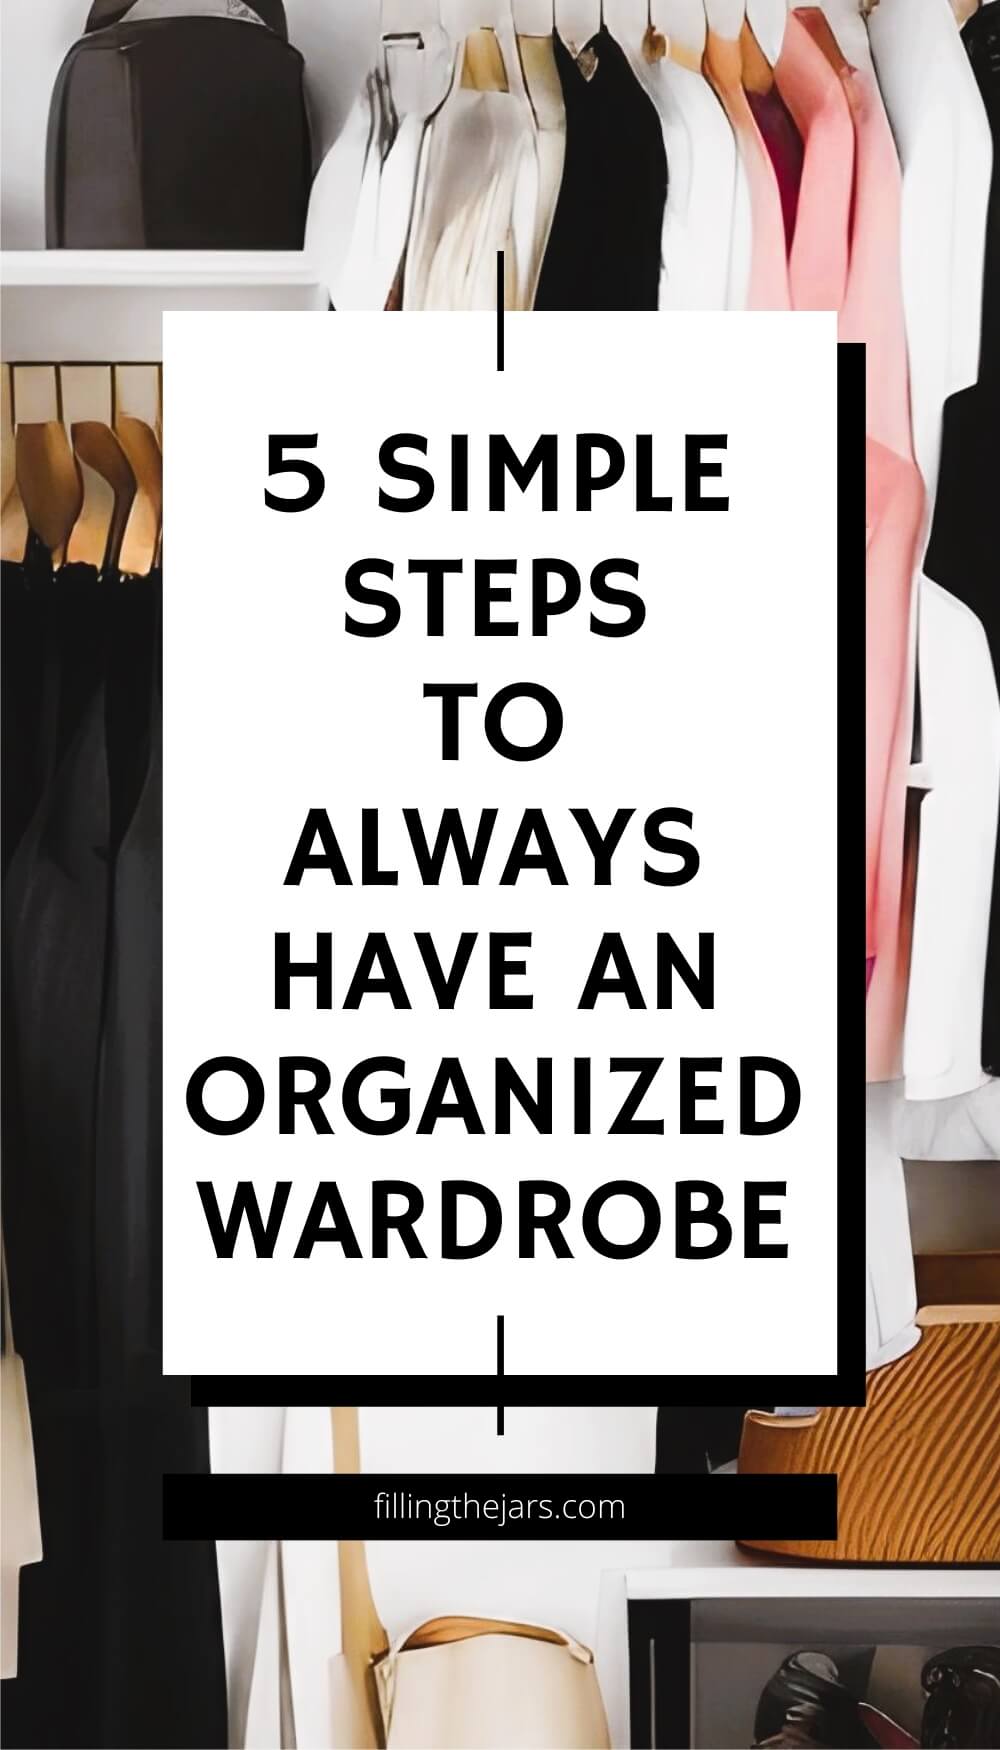 Text 5 simple steps to always have an organized wardrobe on white square over background of organized clothing and accessories in closet.